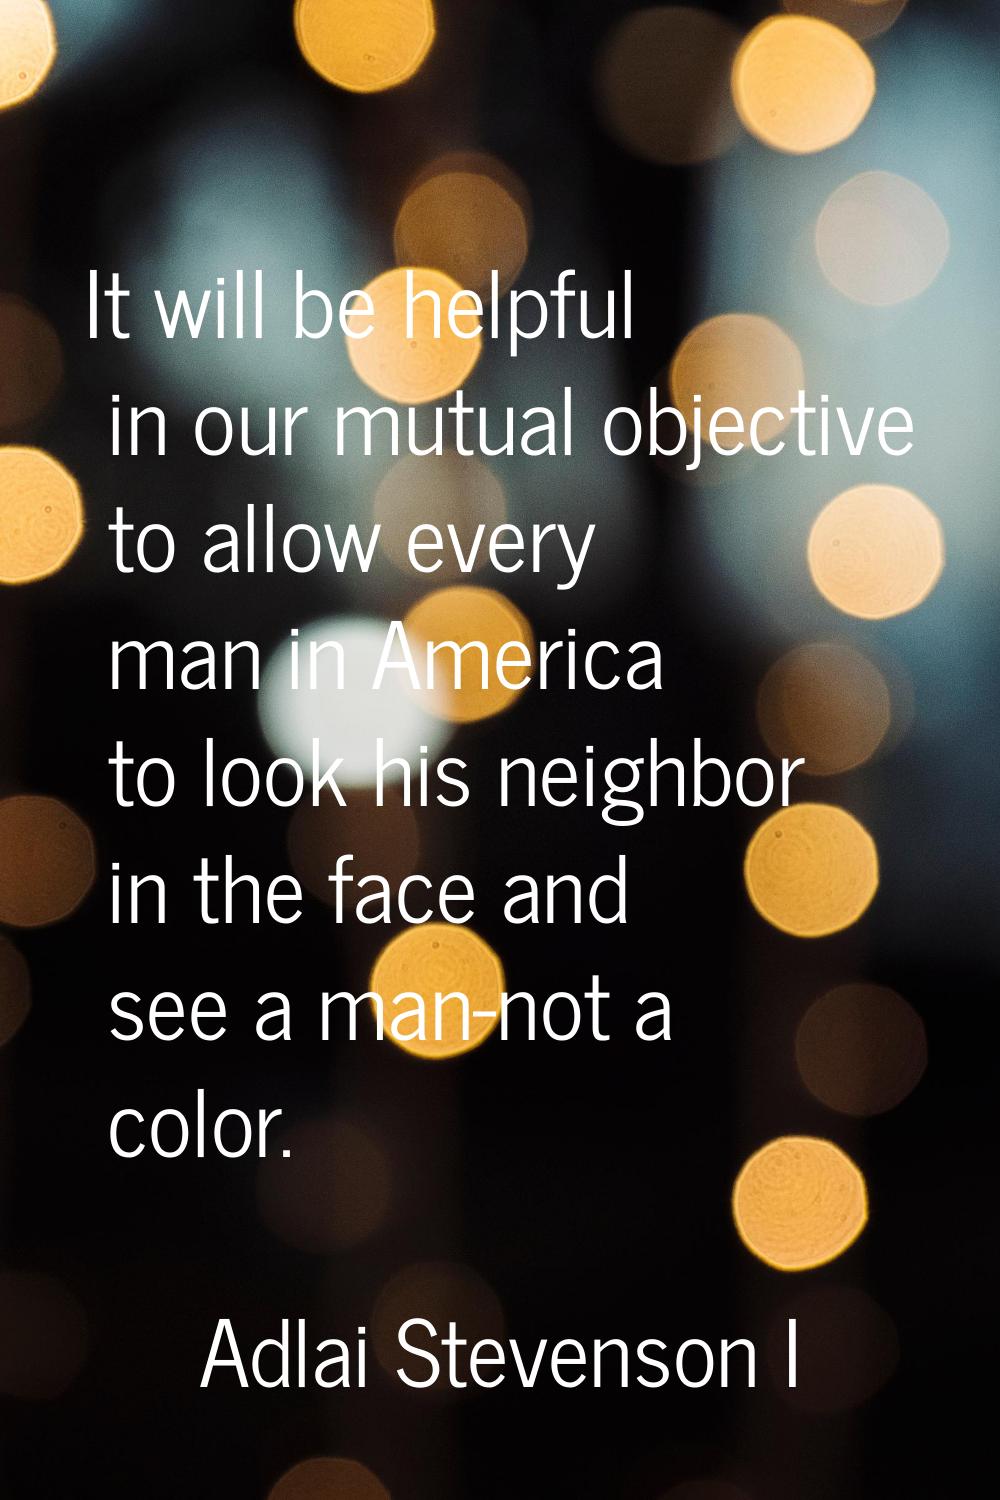 It will be helpful in our mutual objective to allow every man in America to look his neighbor in th